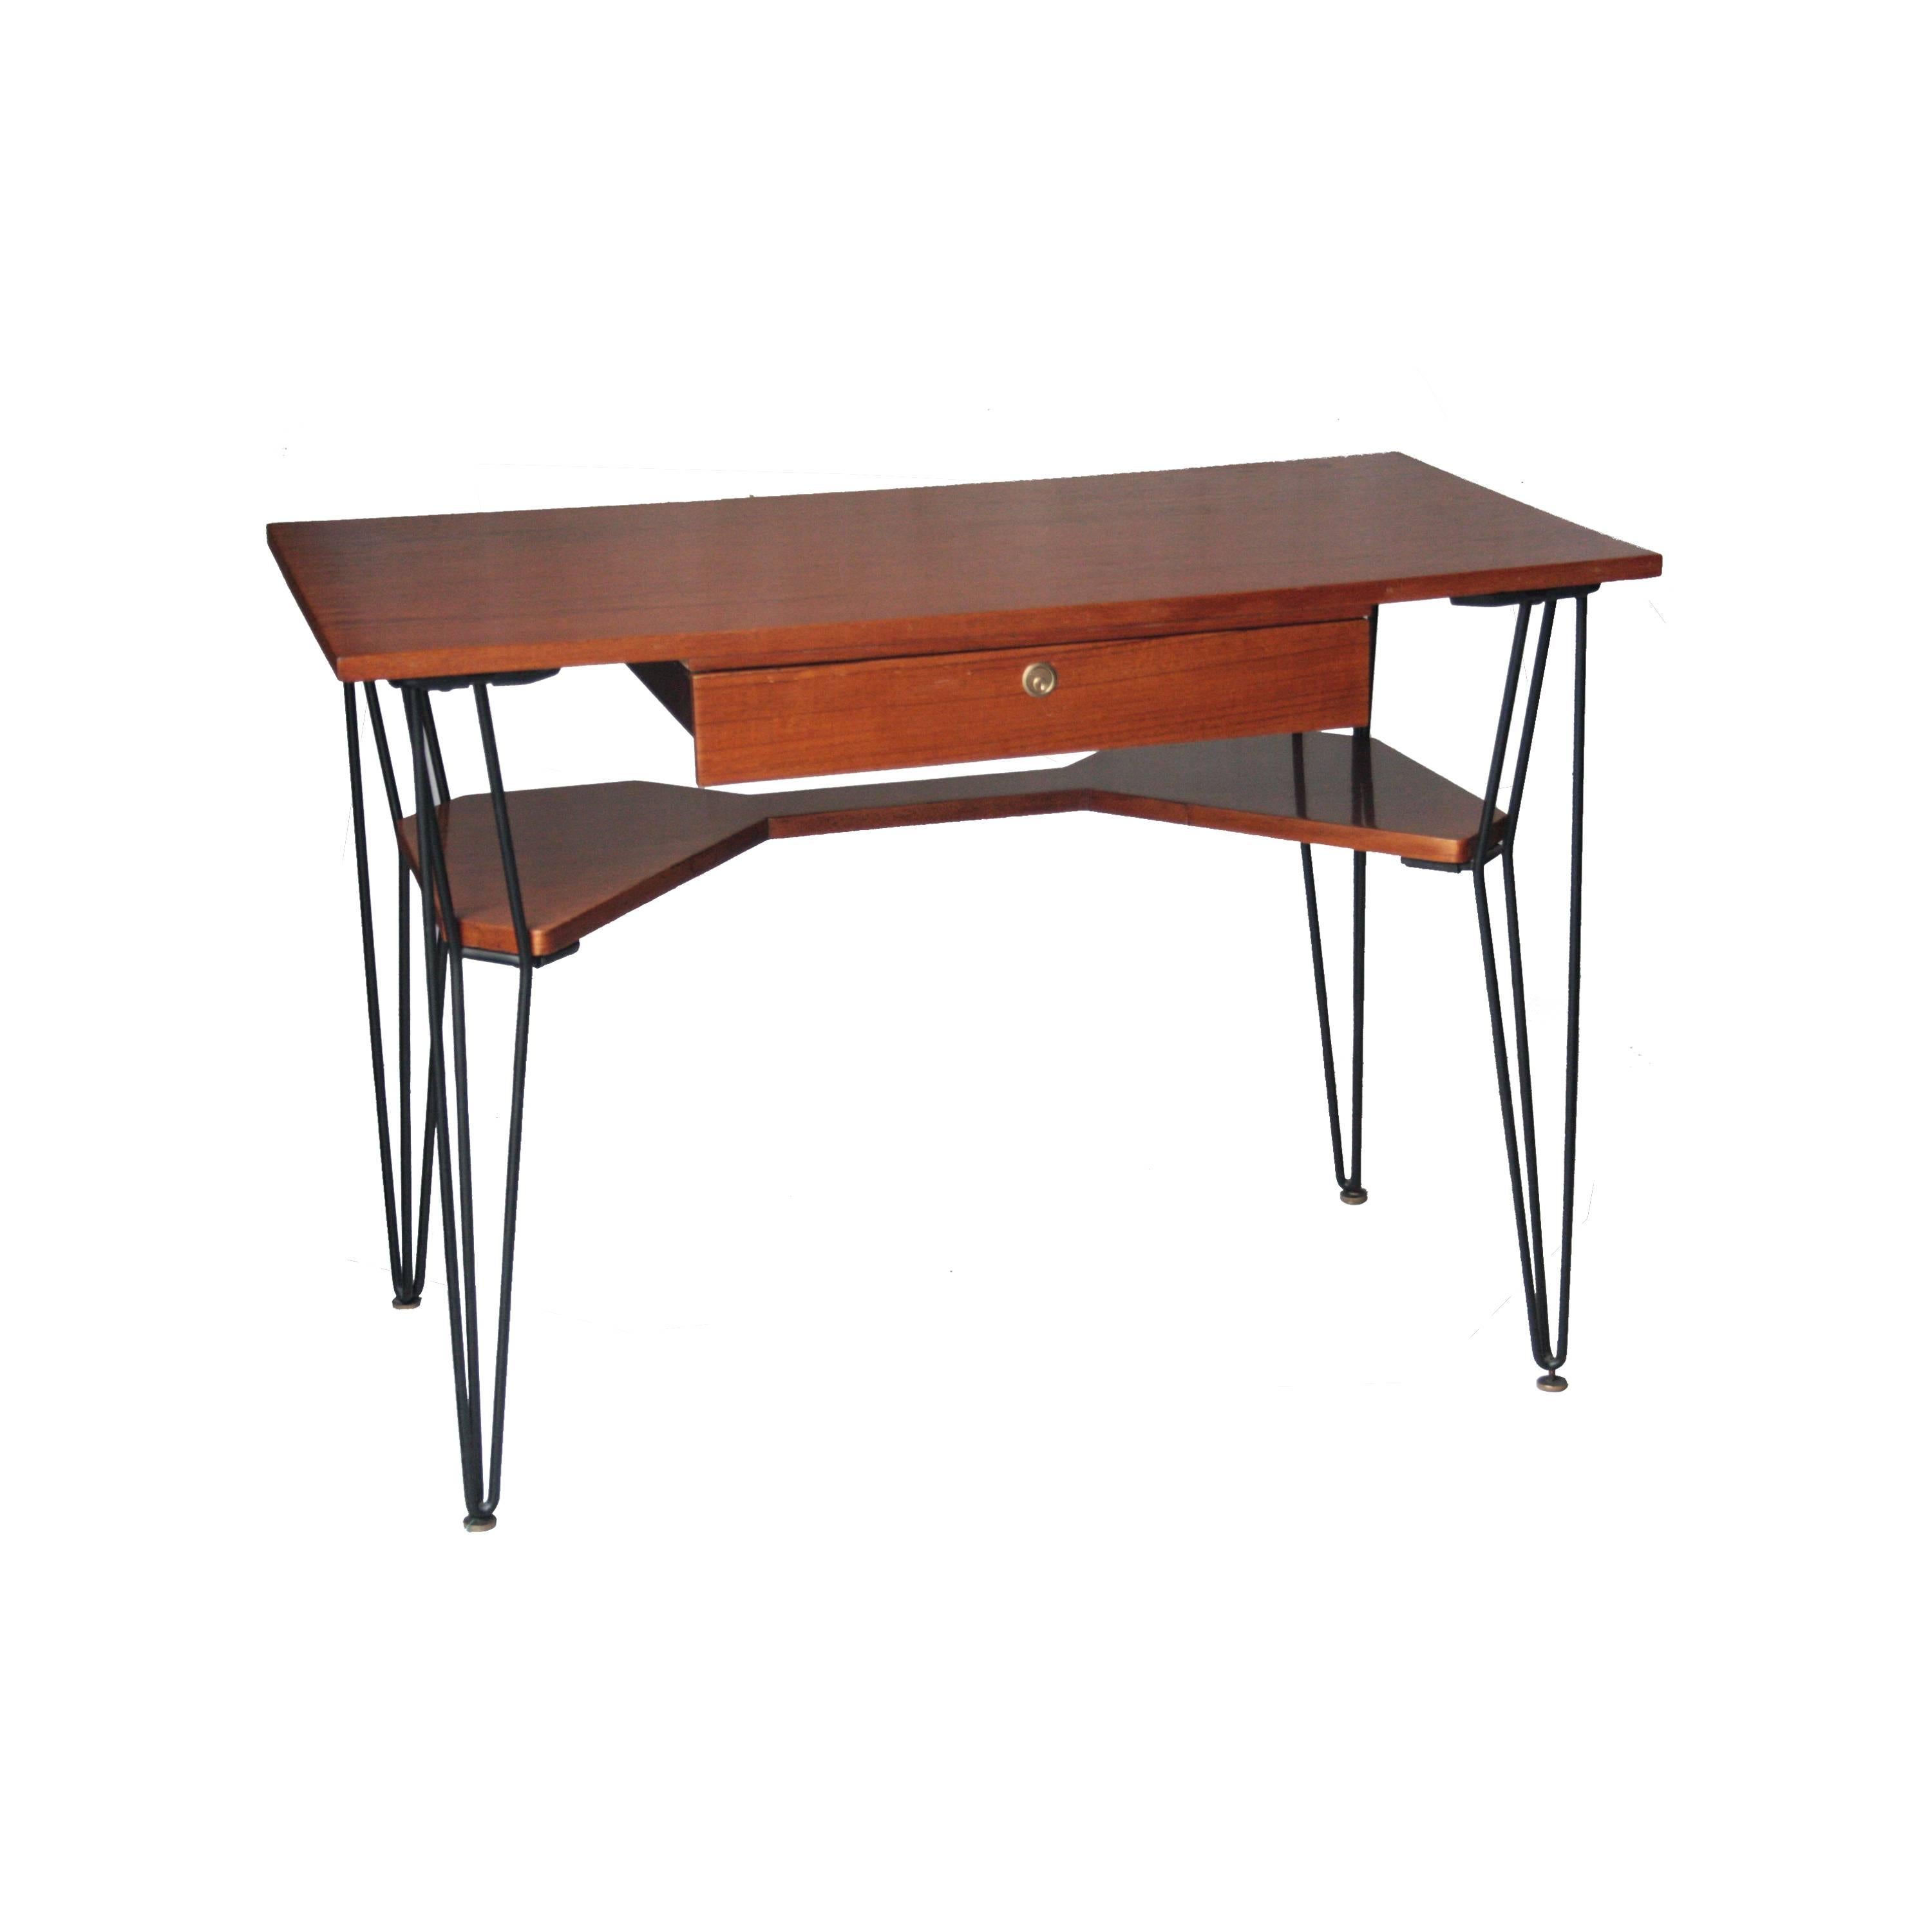 Desk with top, drawers and shelf below made of rosewood and black lacquered metallic legs.

 